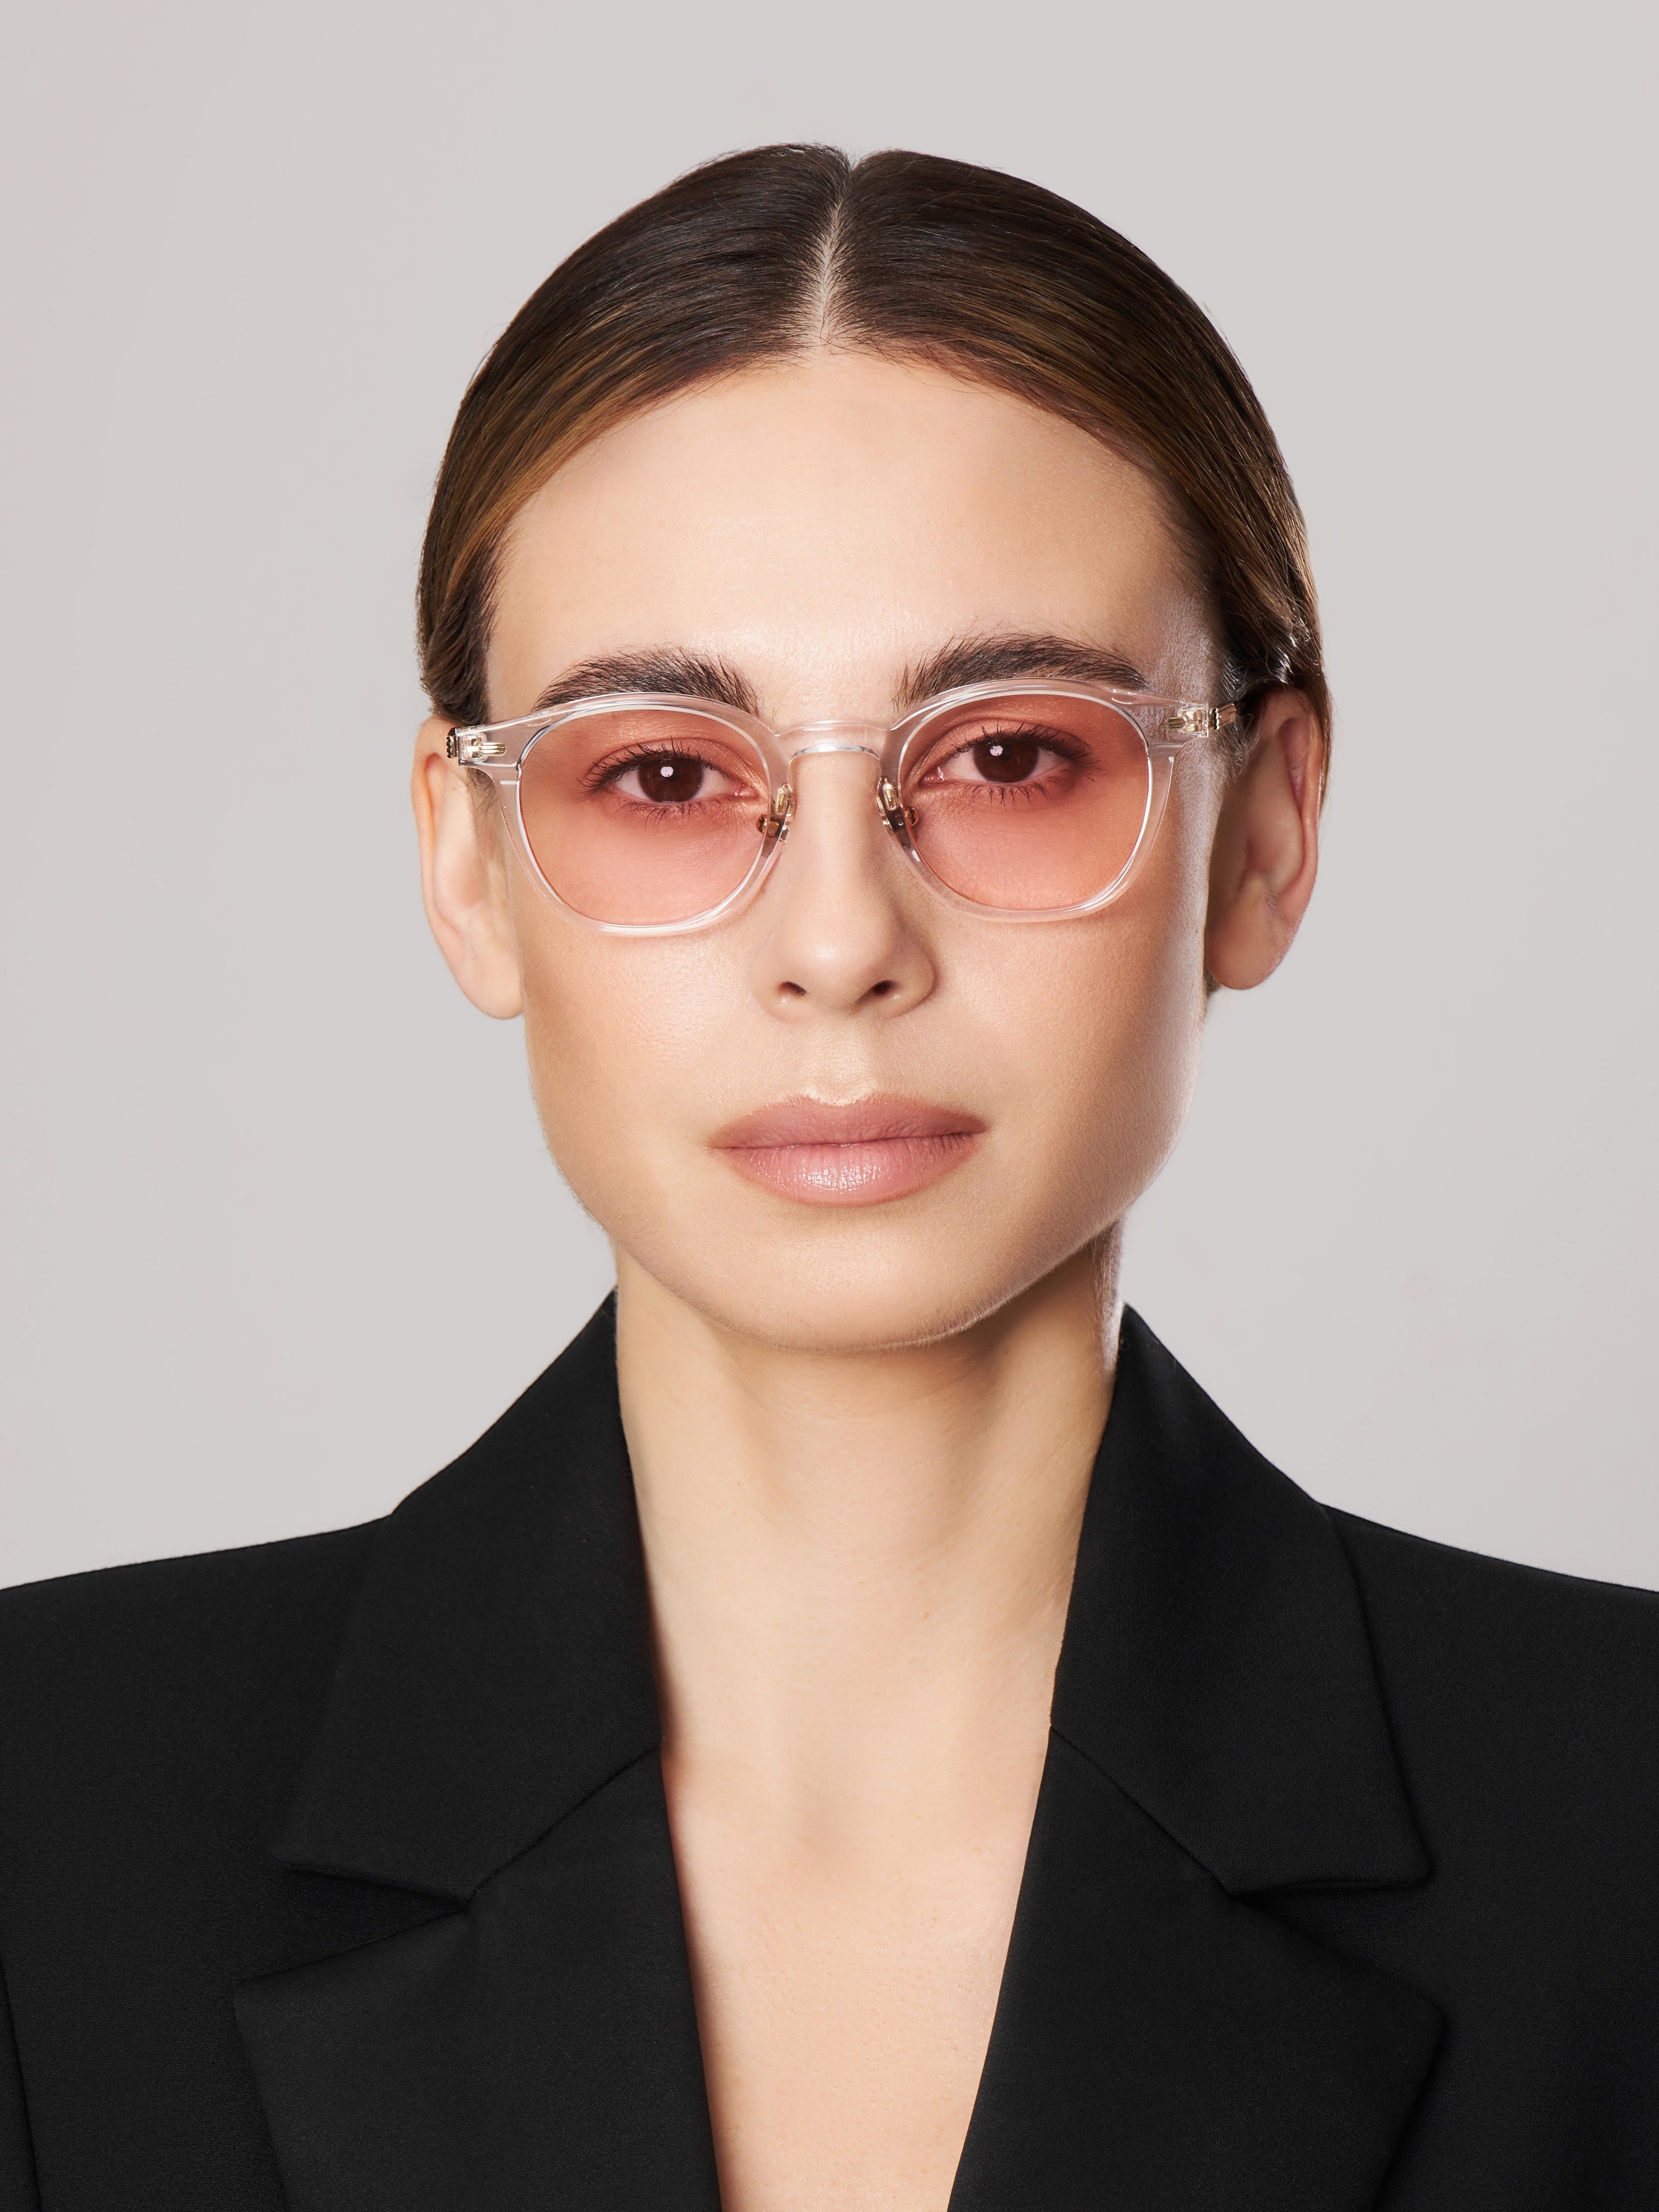 Explore Naruto Nagata online. Exclusive collections of fashionable eyewear for women. The latest Naruto Nagata fashionable sunglasses, limited collections and accessories. Shop Now. Shop Best Sellers. Naruto Nagata Eyewear.